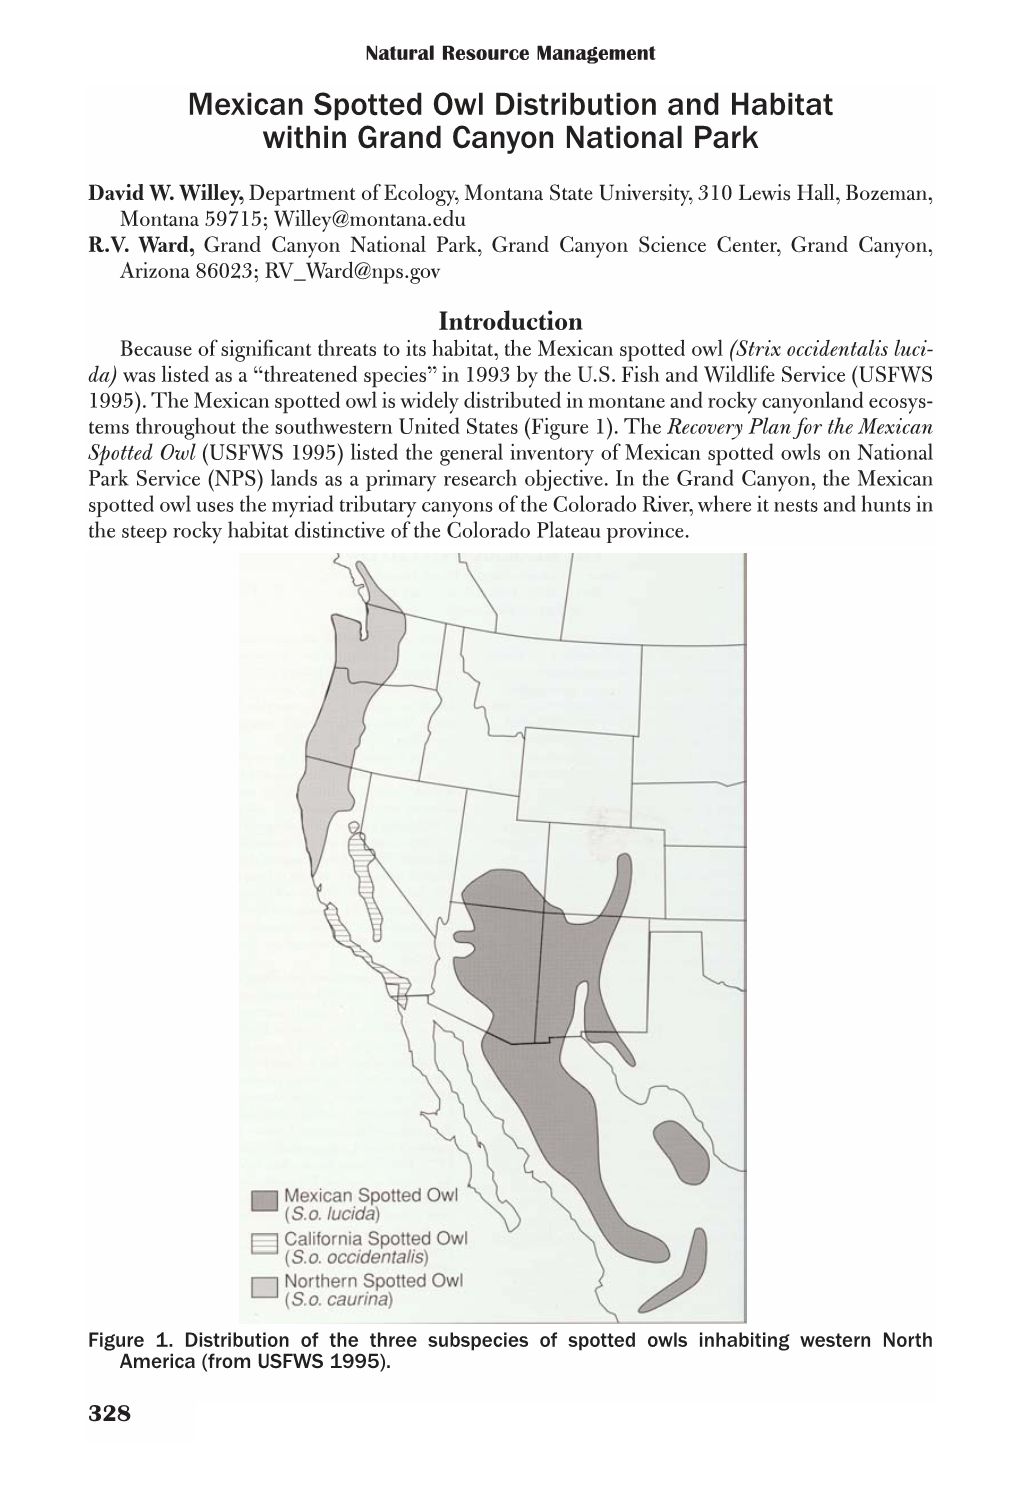 Mexican Spotted Owl Distribution and Habitat Within Grand Canyon National Park